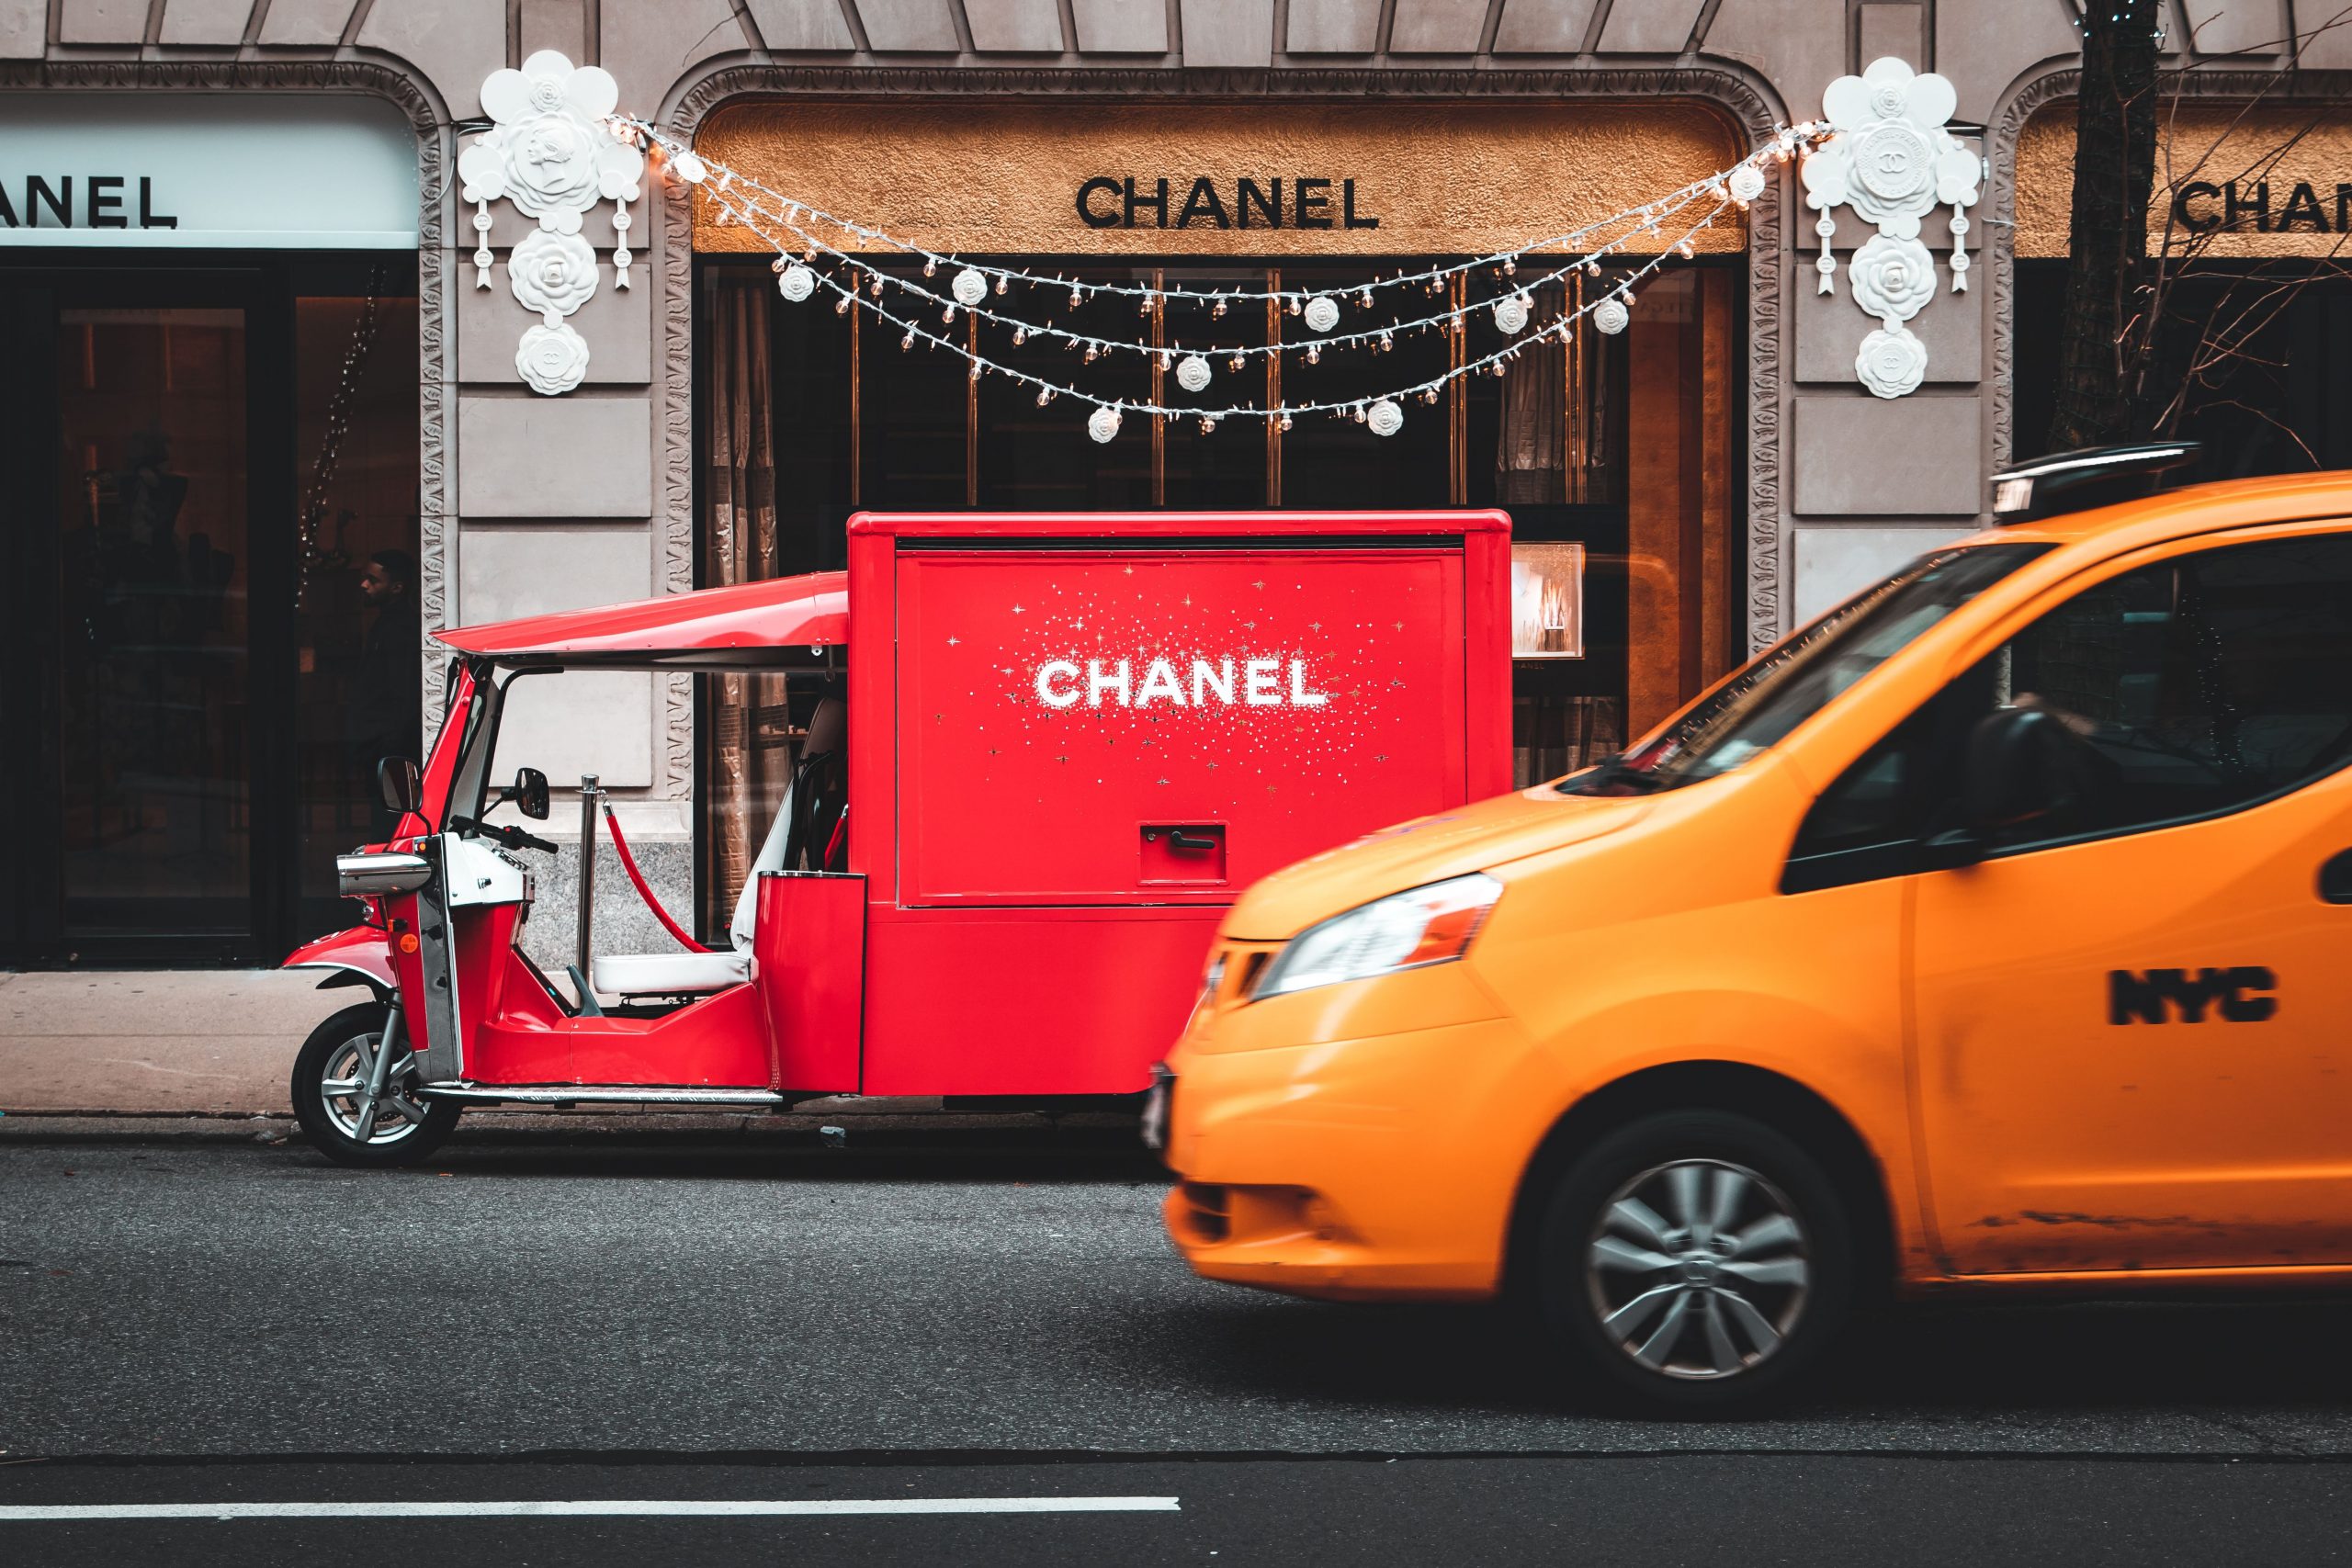 Chanel experiential marketing.